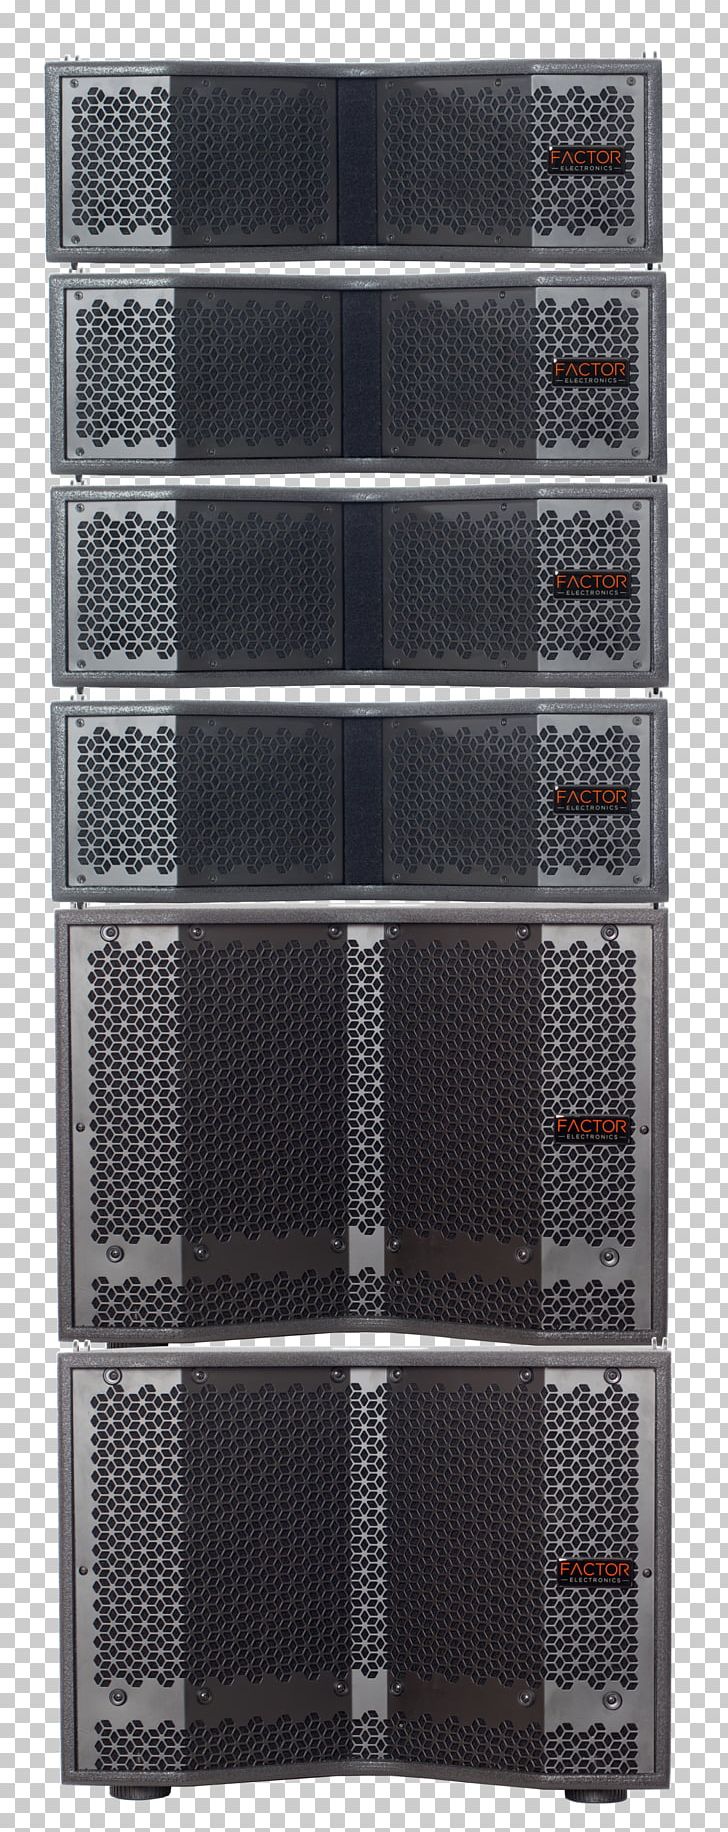 Computer Cases & Housings Disk Array Computer Servers Computer Cluster PNG, Clipart, Array, Computer, Computer Case, Computer Cases Housings, Computer Cluster Free PNG Download